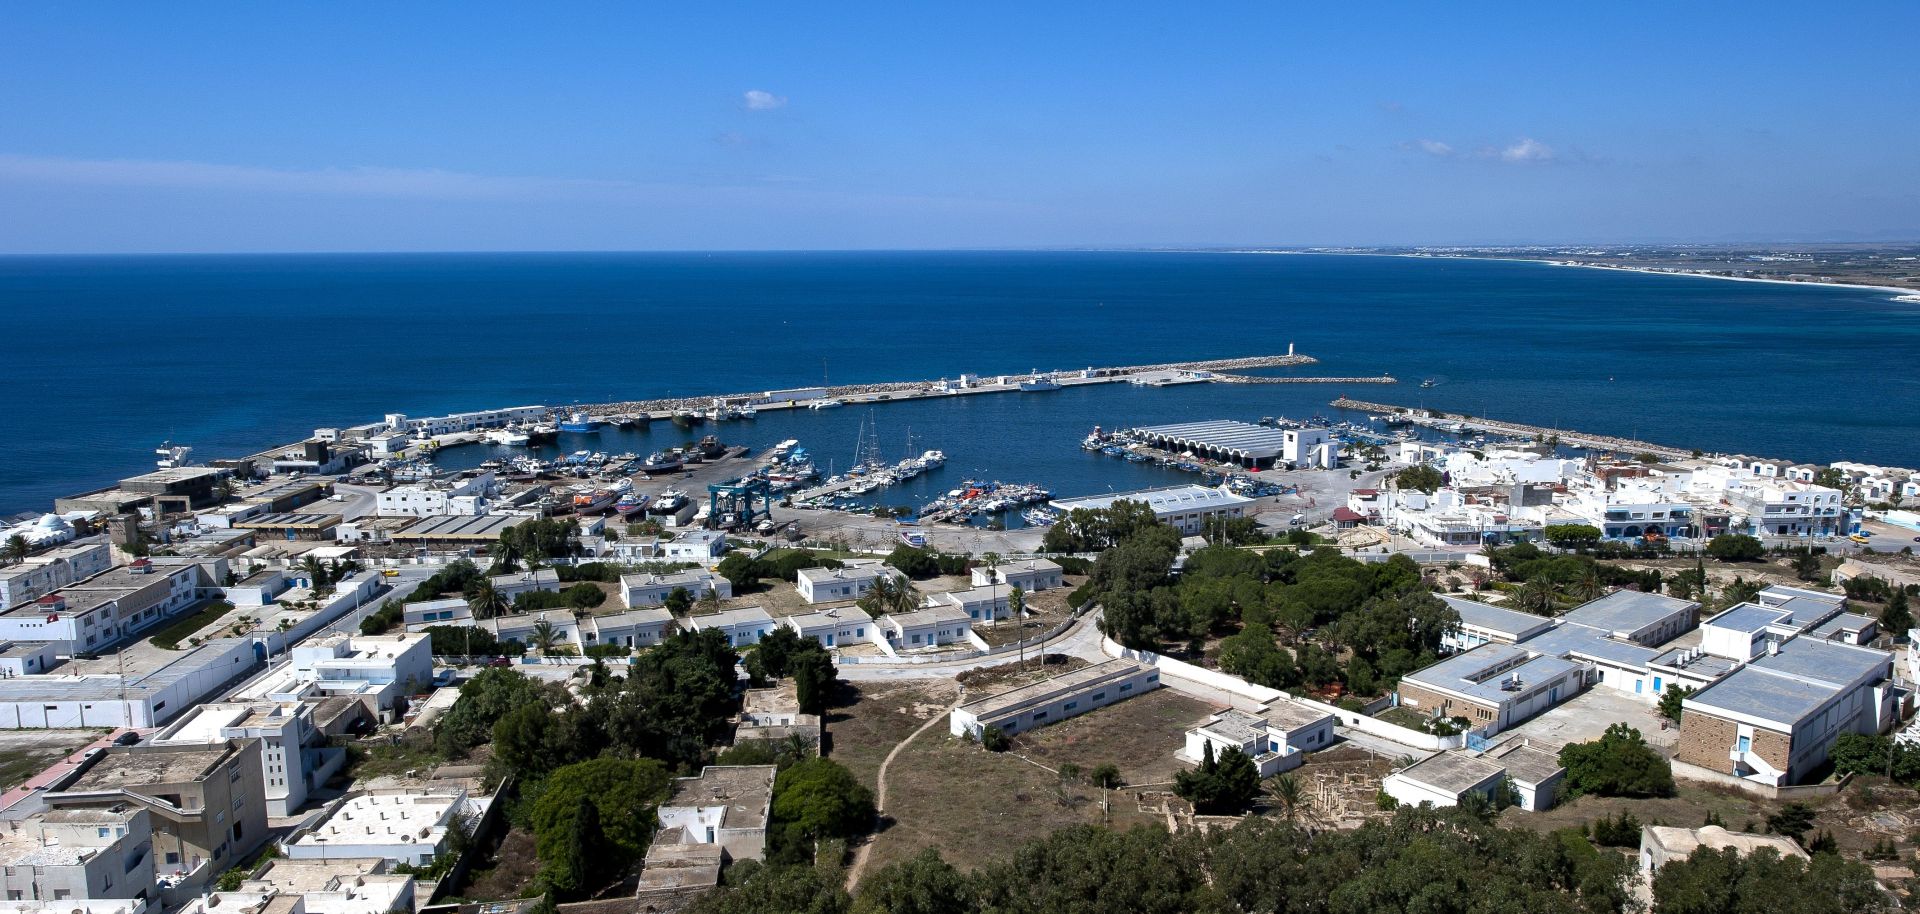 View of the Mediterranean Sea from the port of Kelibia in Tunisia.